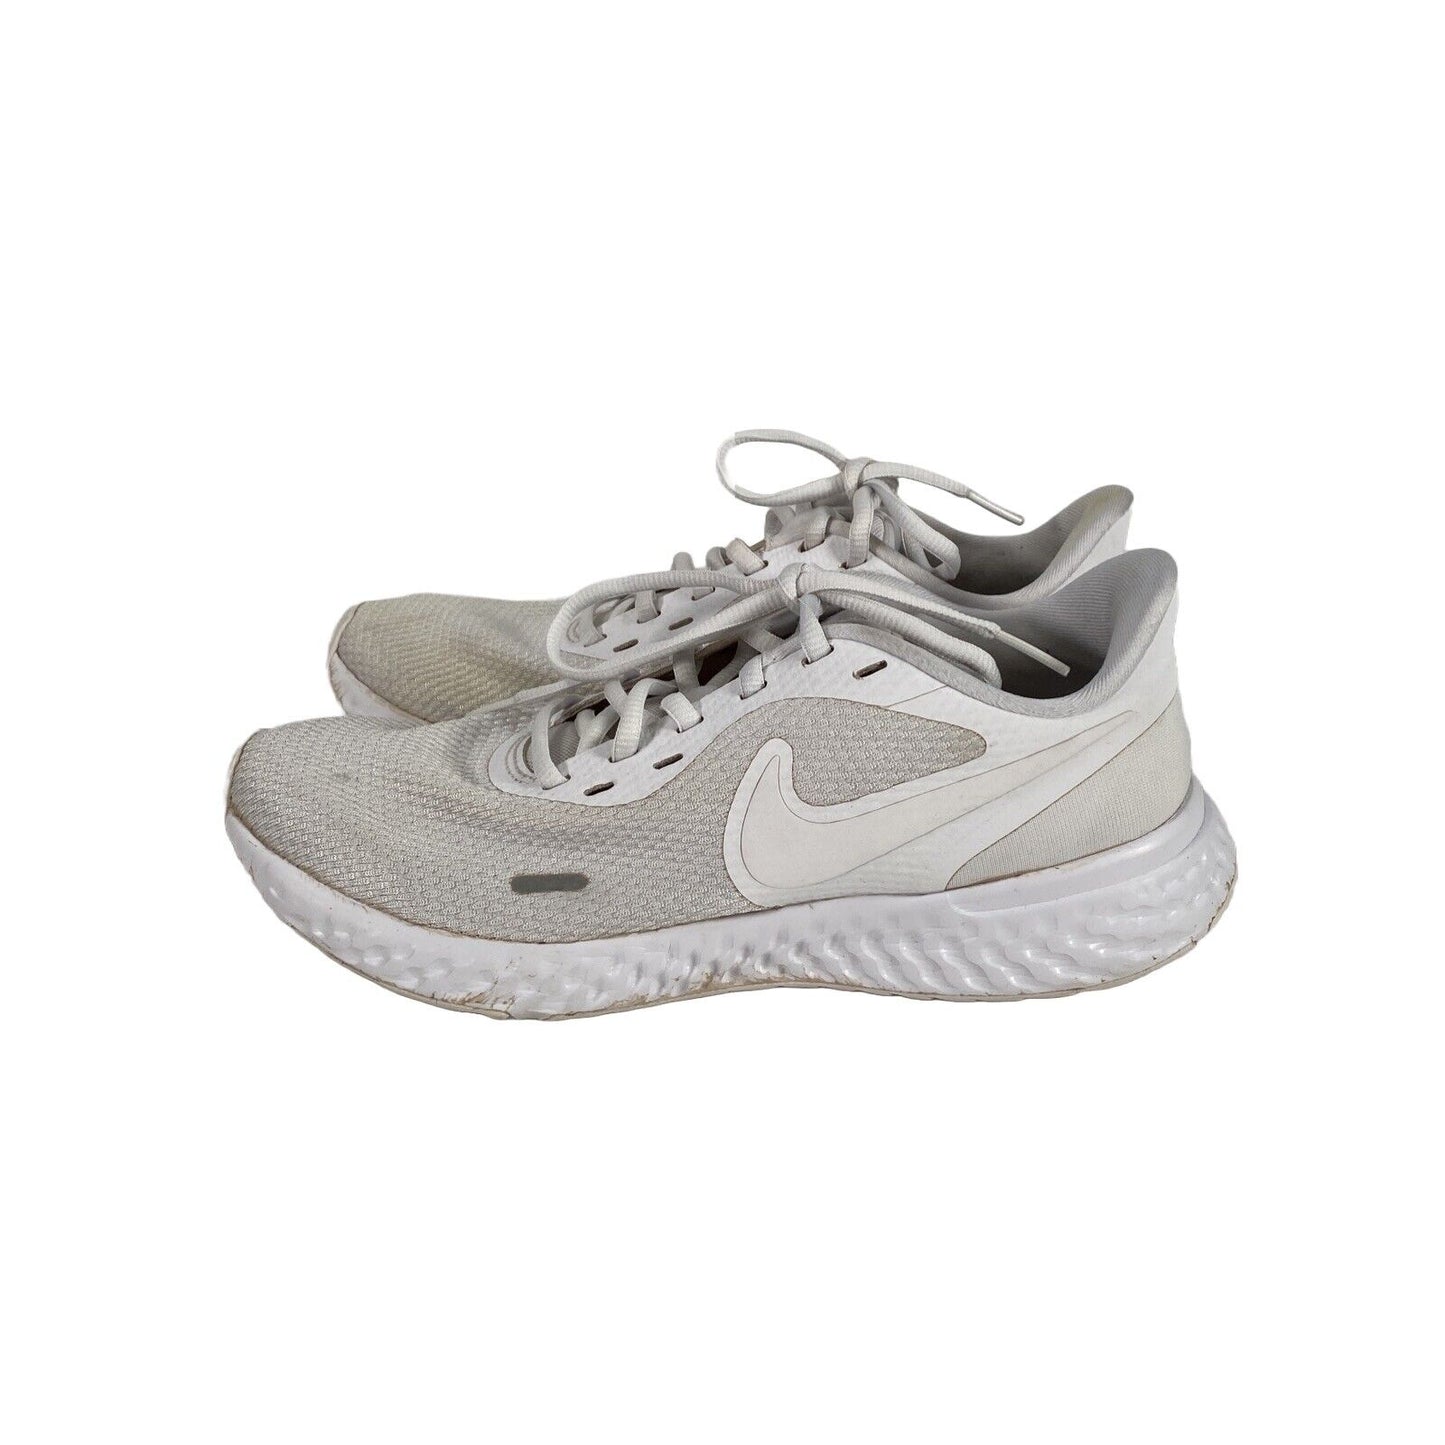 Nike Women's White Revolution 6 Lace Up Casual Sneakers BQ3207 - 8